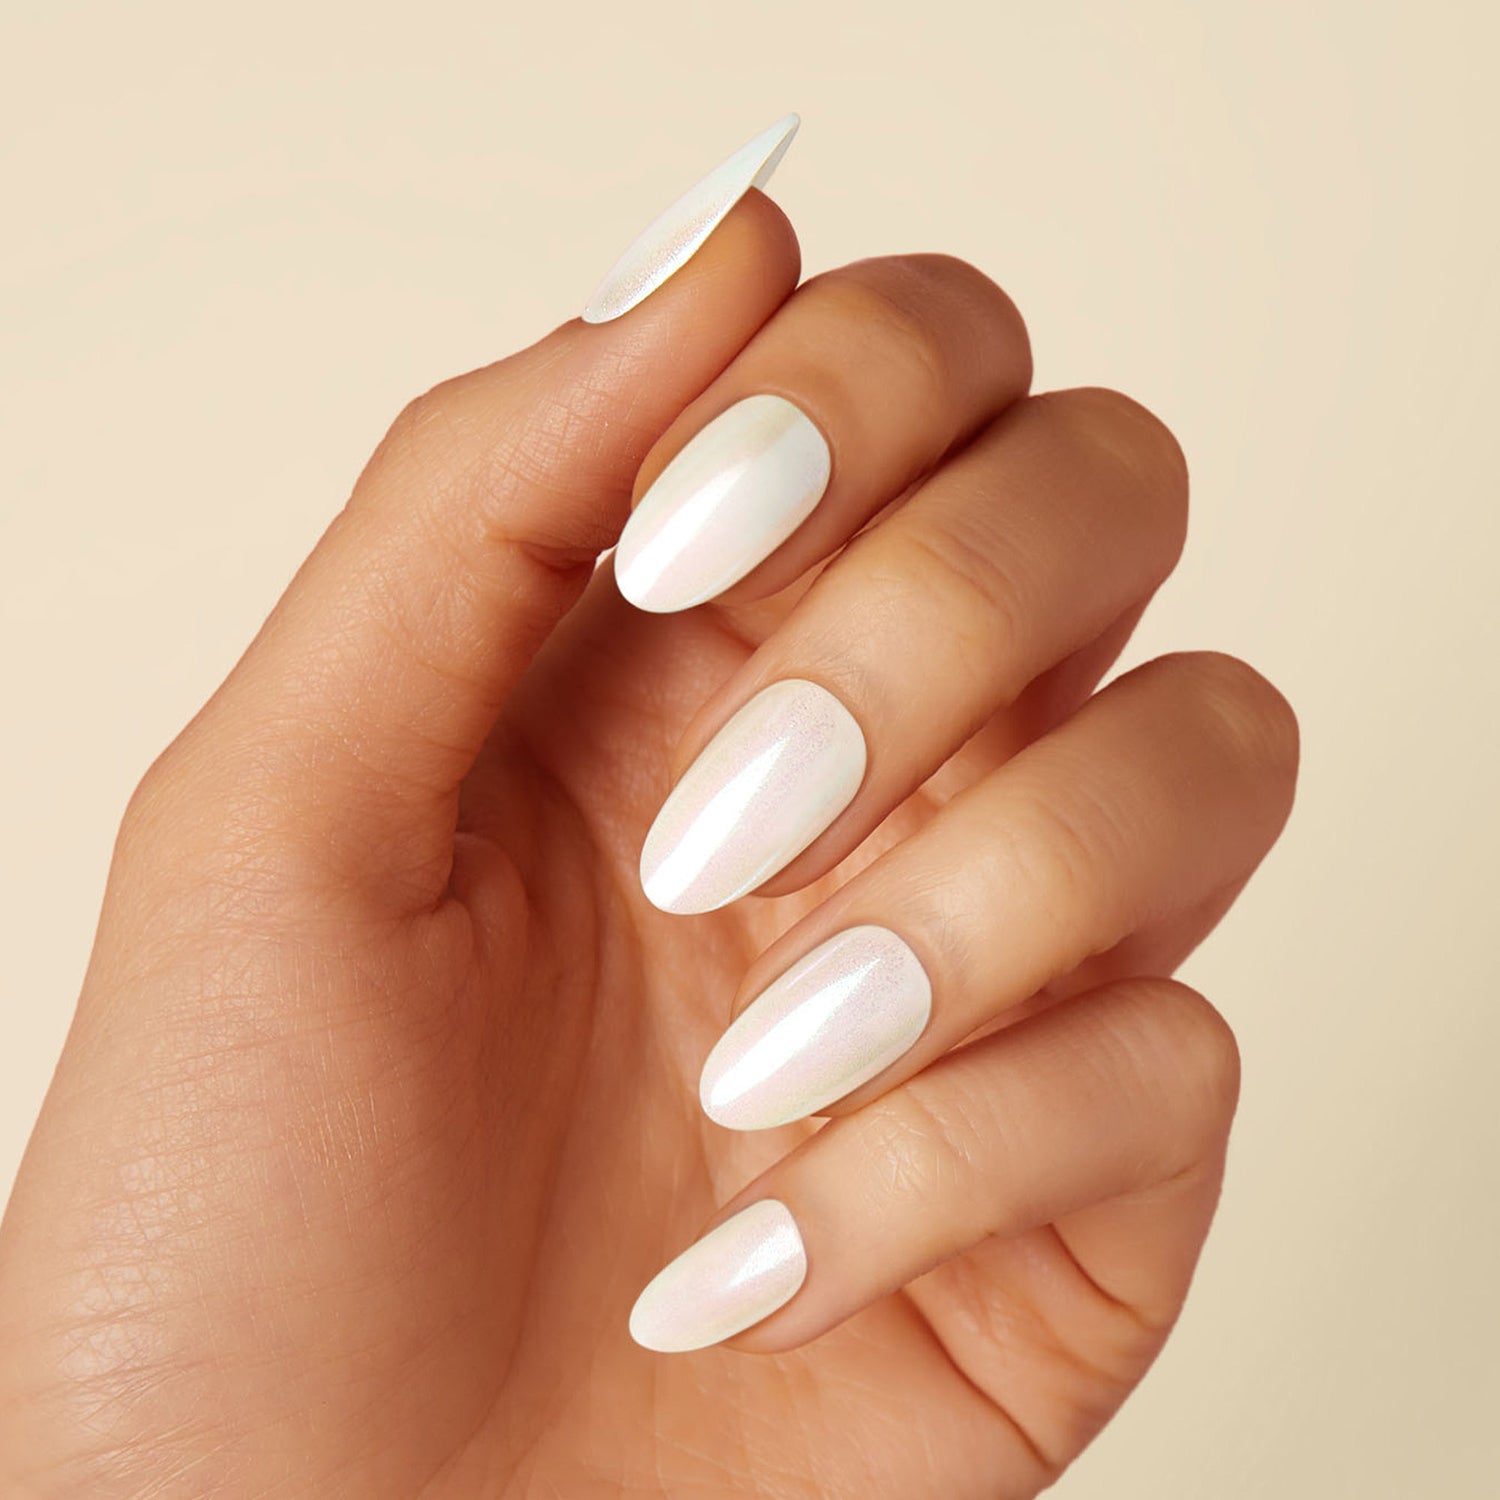 Off-white pearlescent press-on gel nails featuring, medium length, almond shape, and a metallic chrome finish.